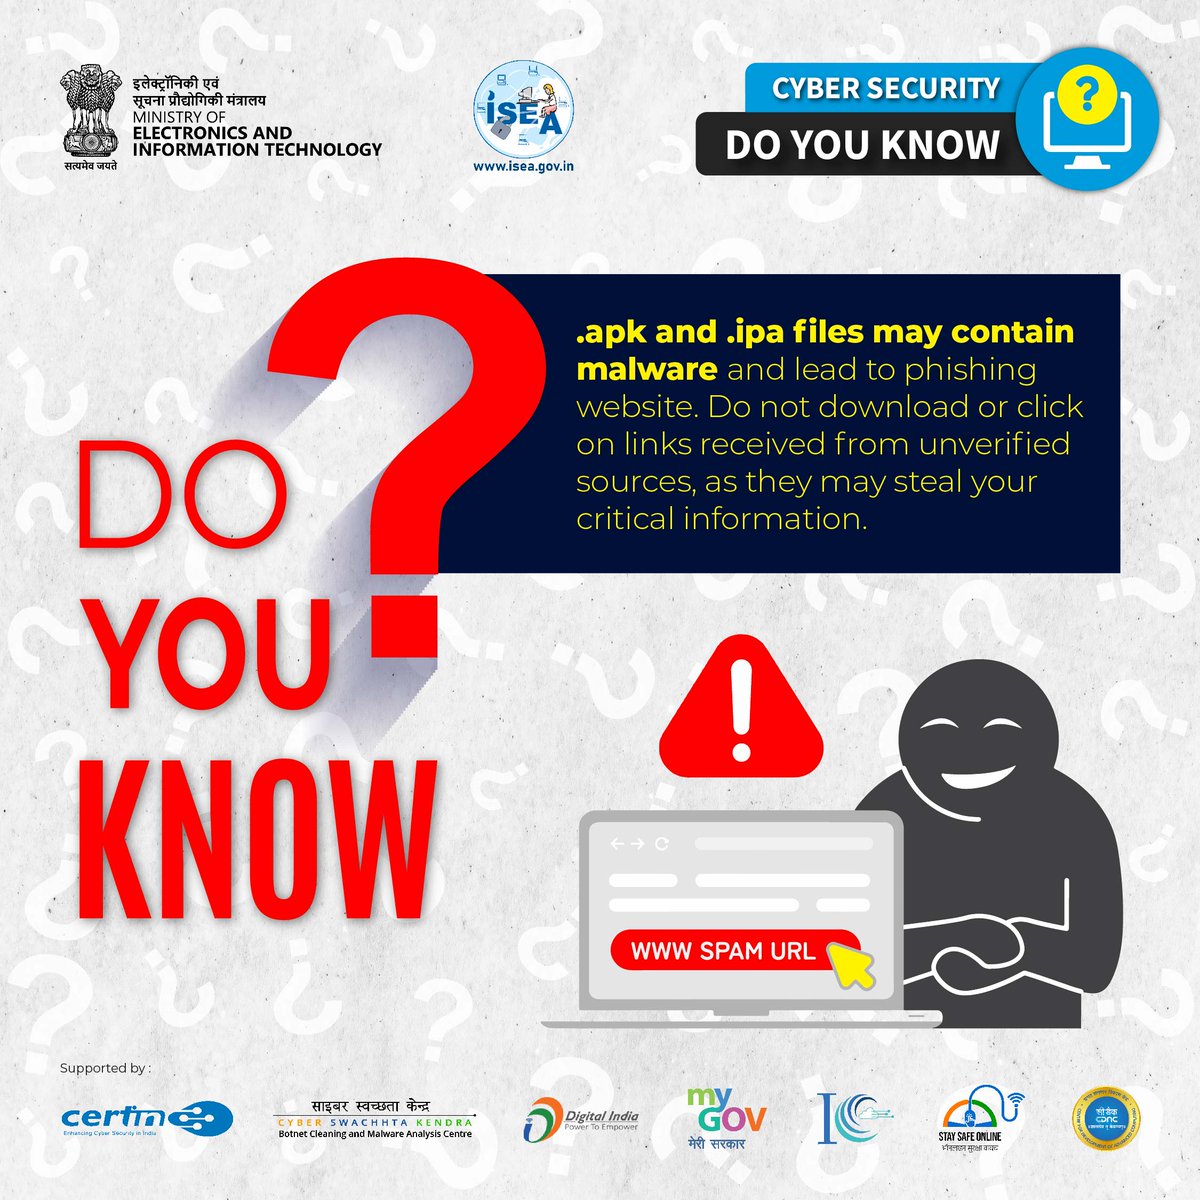 #DoYouKnow Downloading .apk and .ipa files contains malware, may lead to phishing attack. #malware #phishing #spamlink #message #ISEA #CyberSecurity #BeSafe #StaySafe